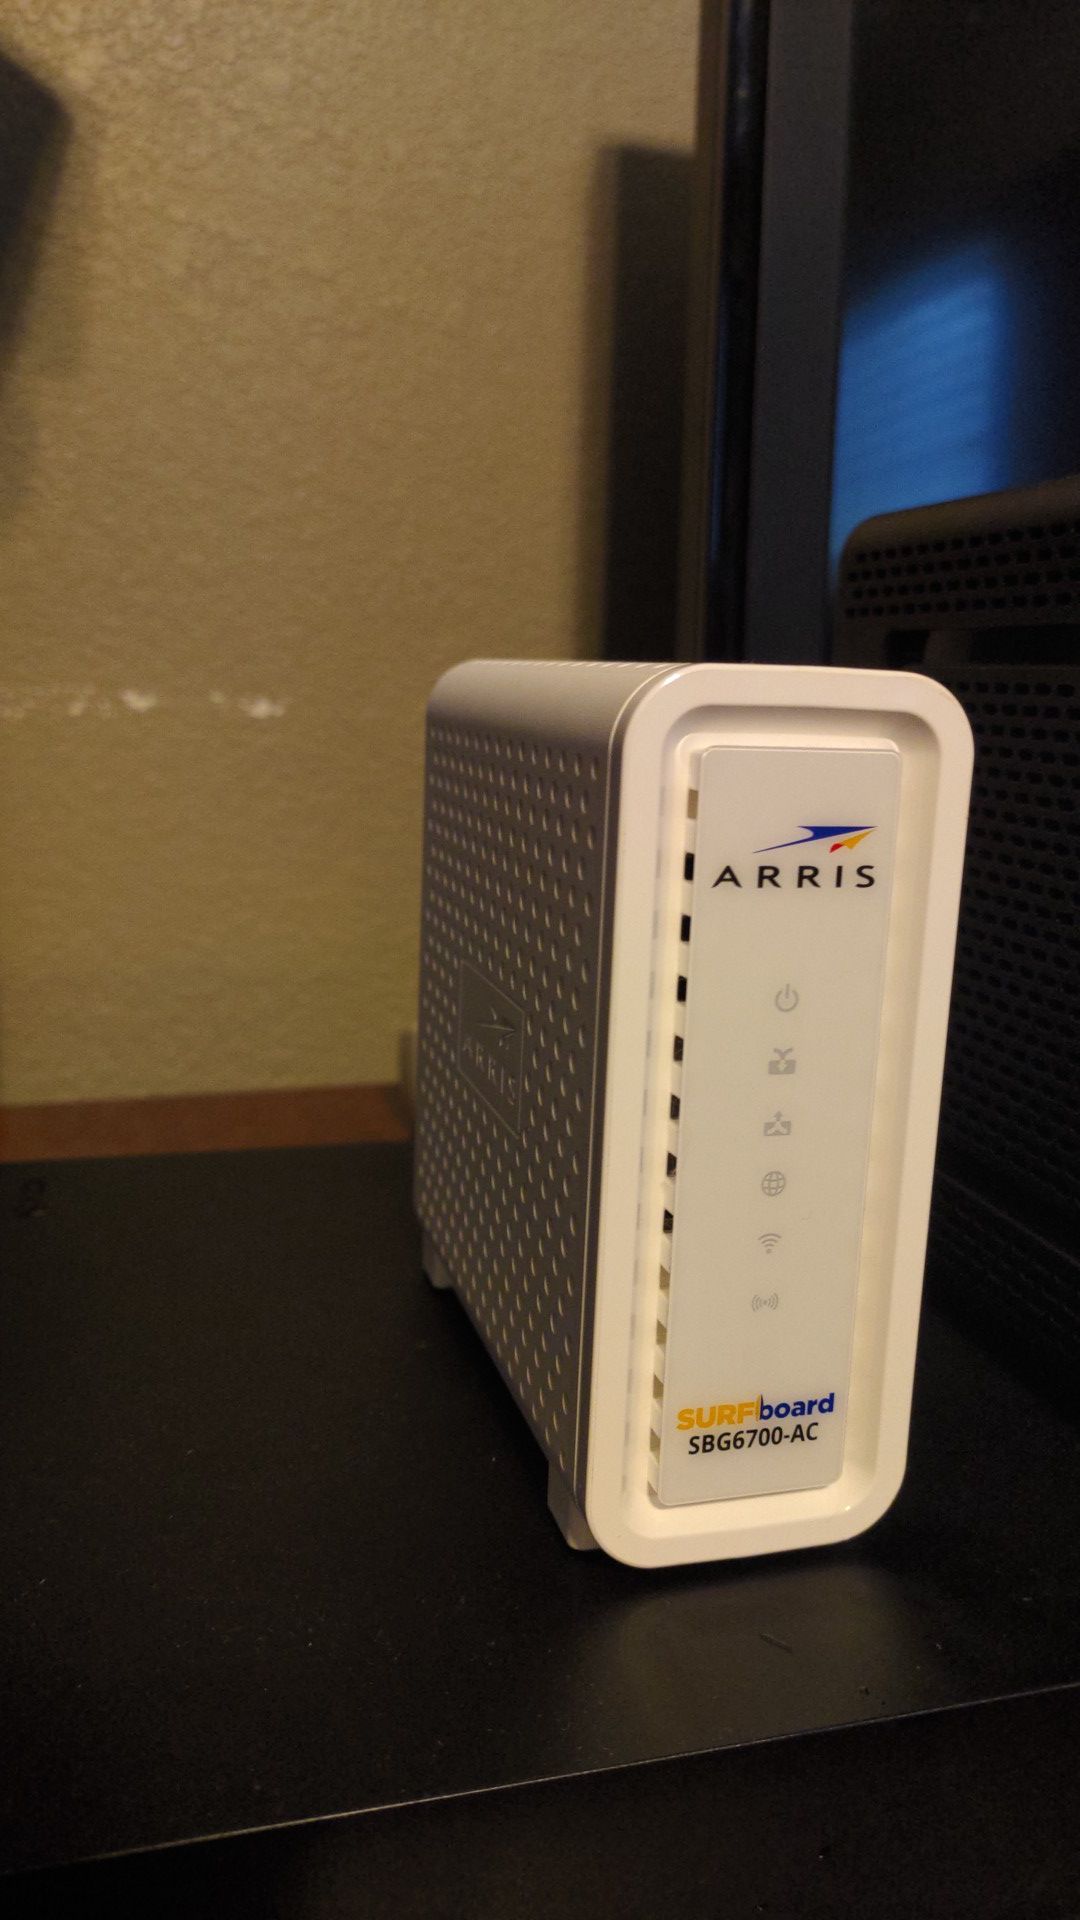 Comcast certified Wi-Fi router modem combos